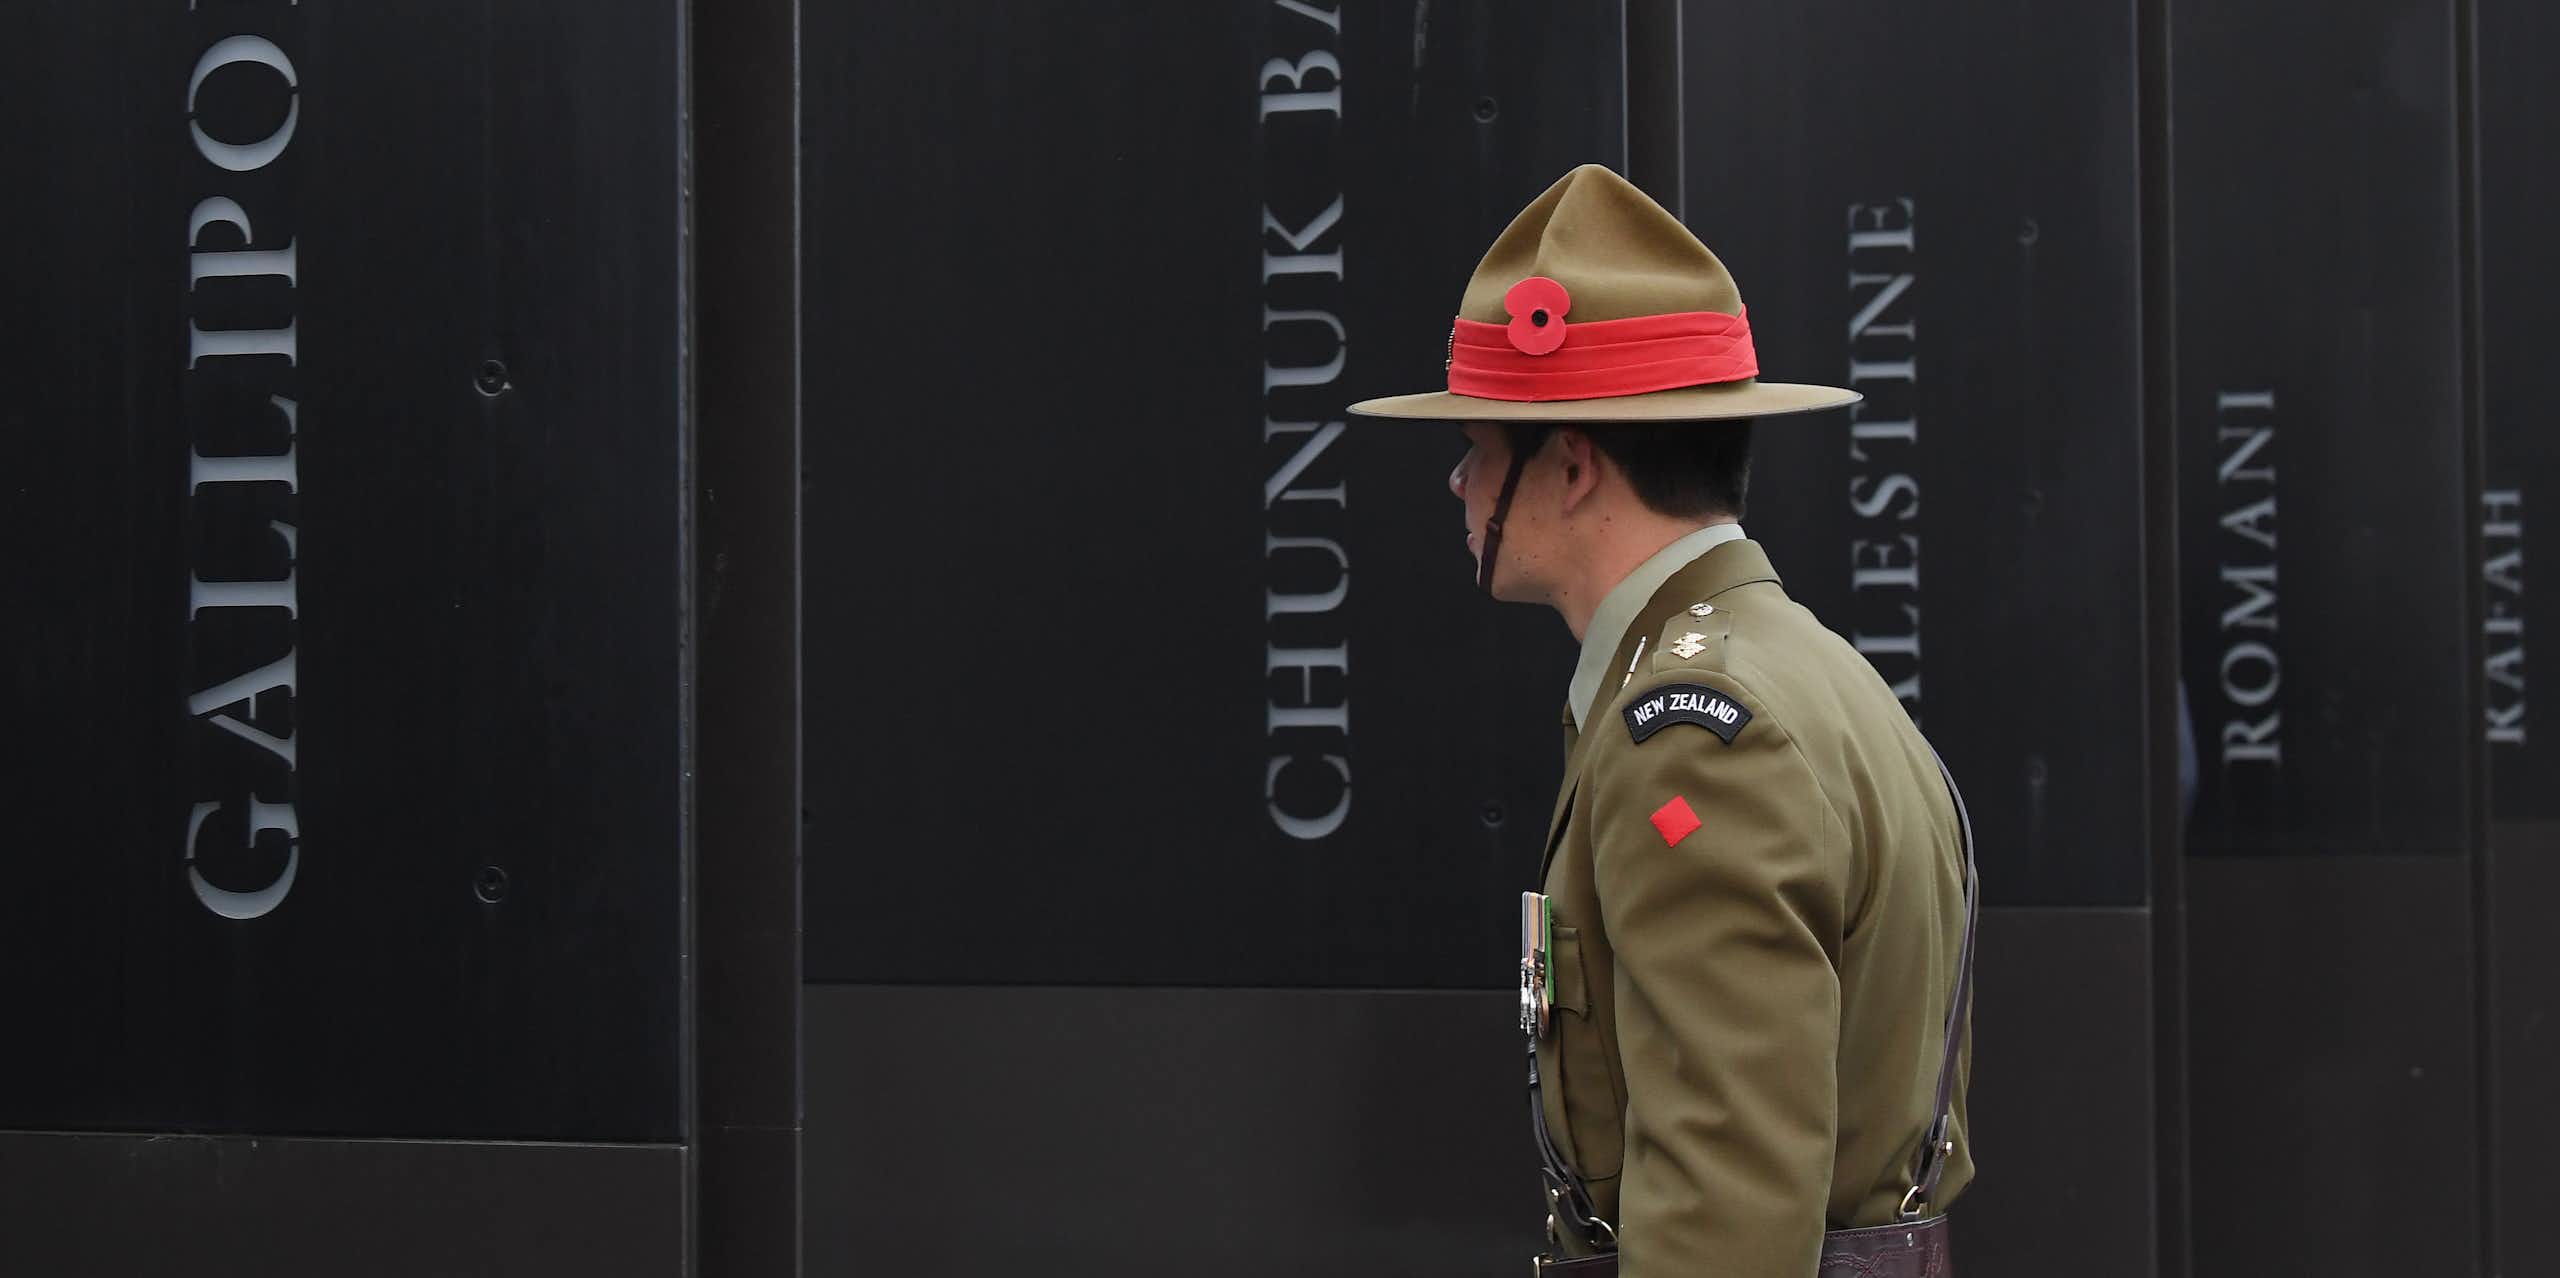 New Zealand soldier in front of World War 1 memorial showing battle names